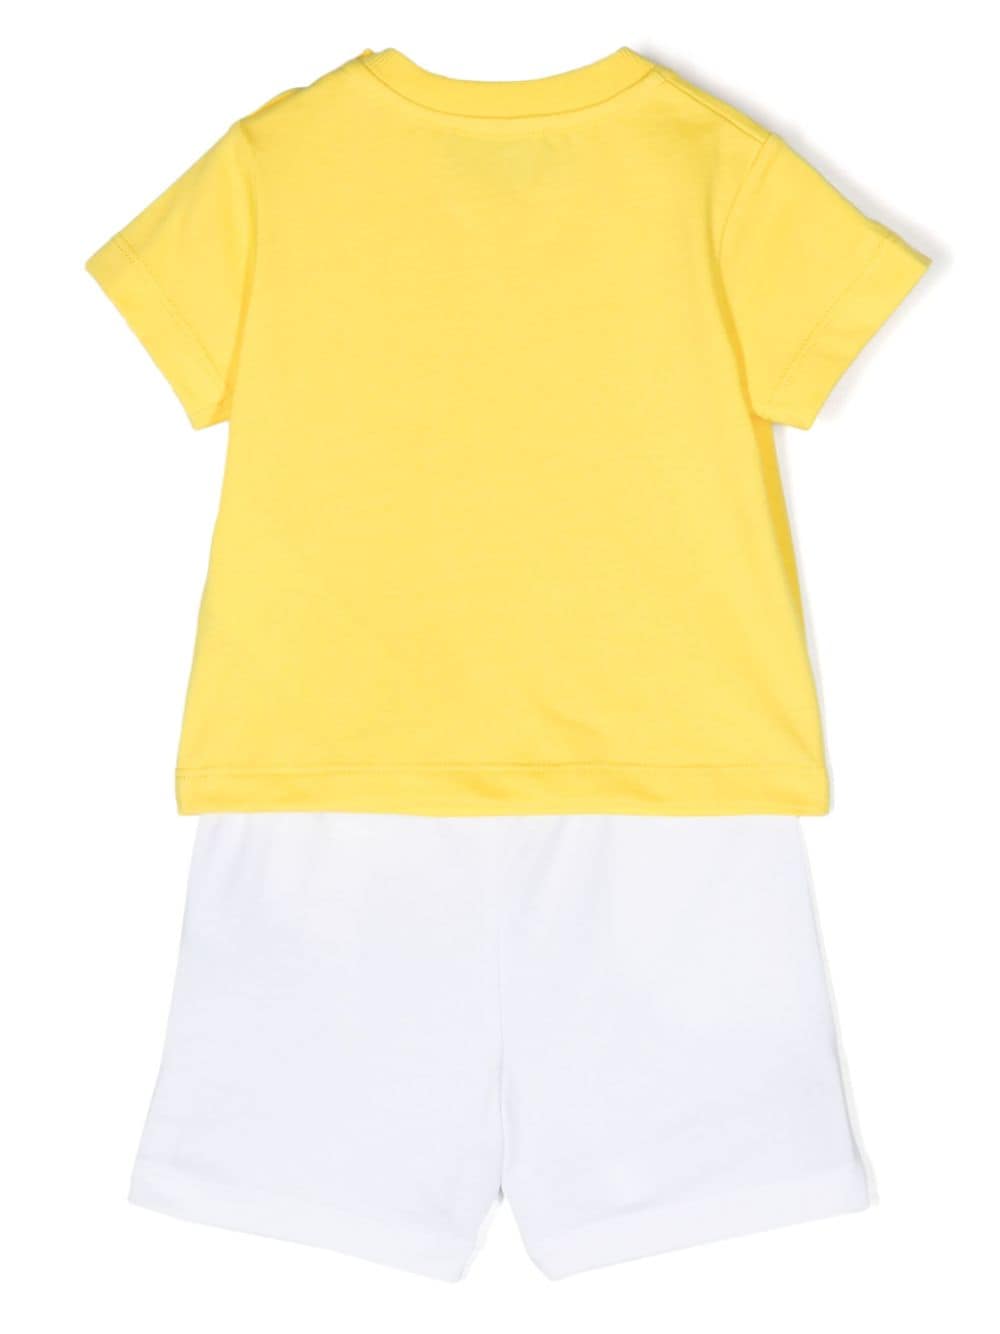 Yellow and white sports outfit for newborns